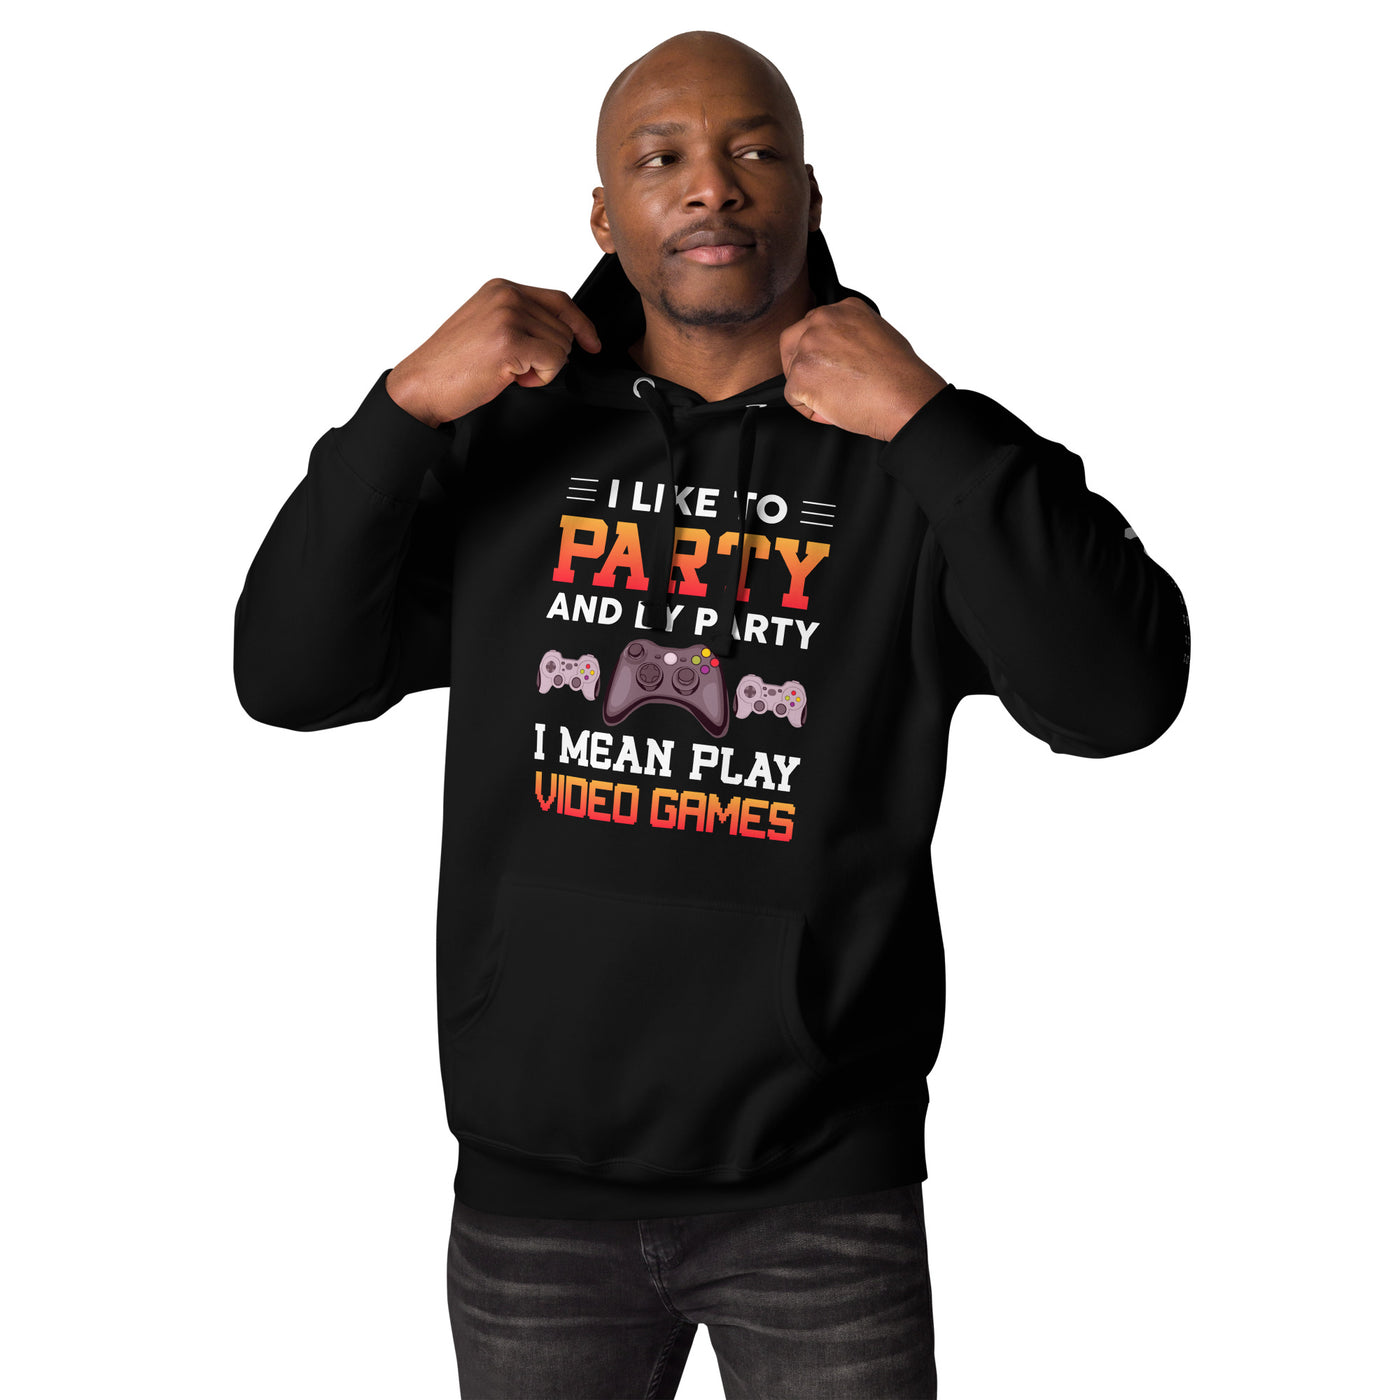 I Like to Party and by Party, I mean Play Video Games - Unisex Hoodie